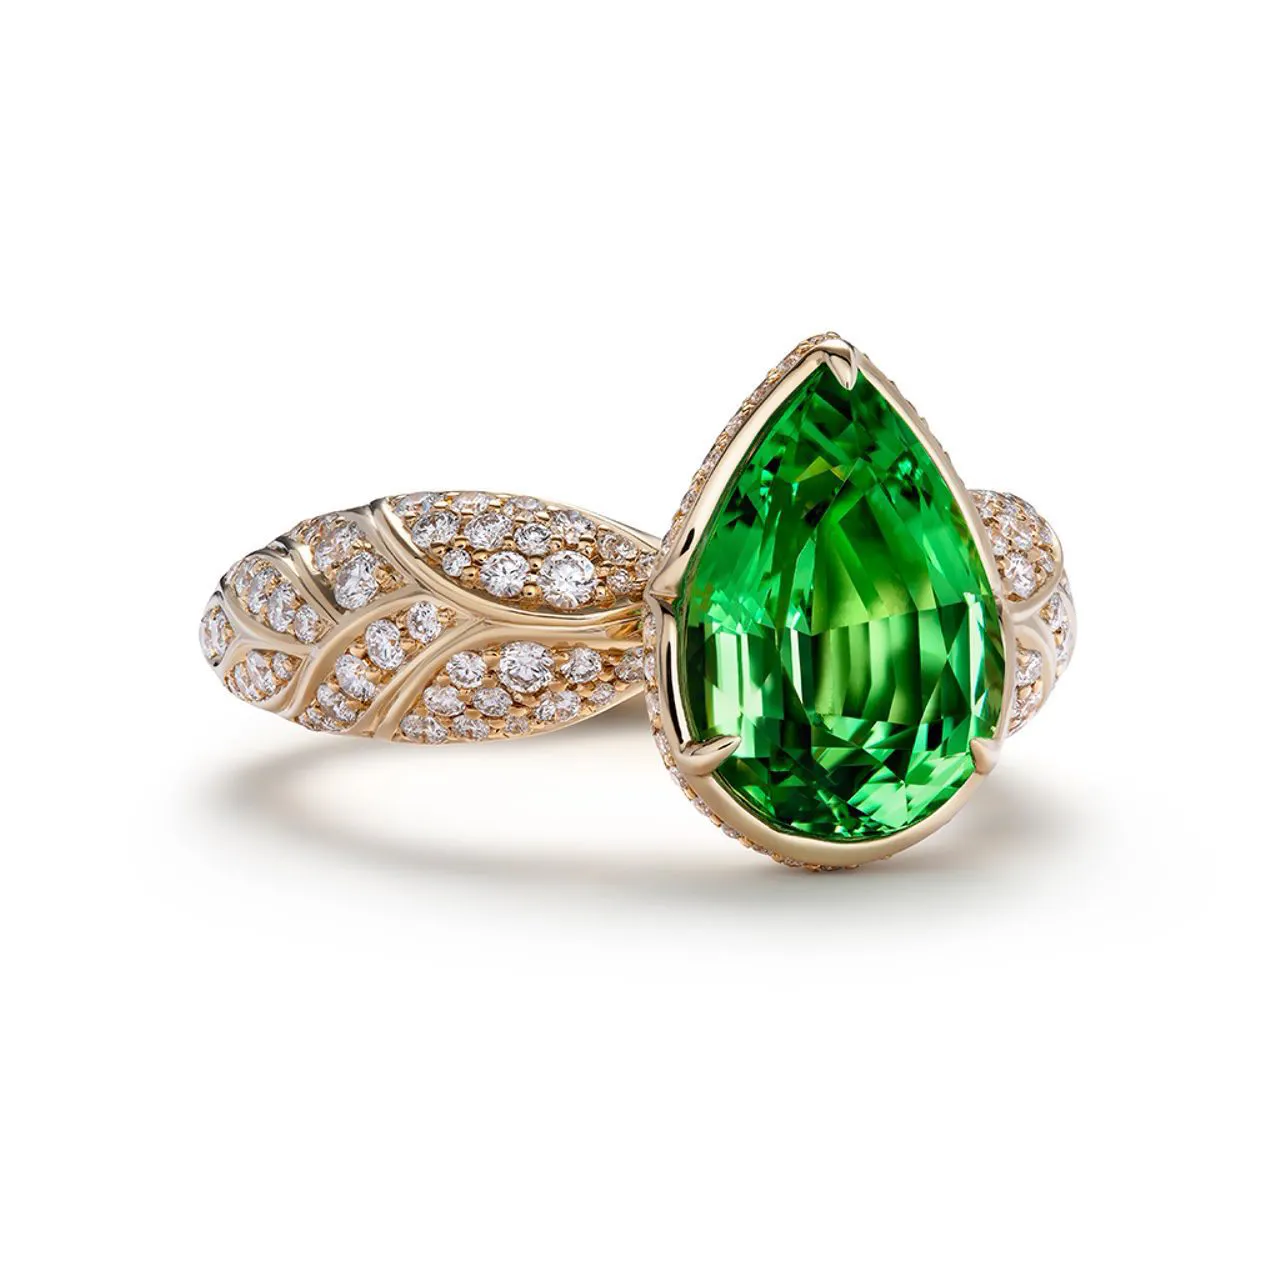 32 Green Gemstones (How Many Do You Know?)